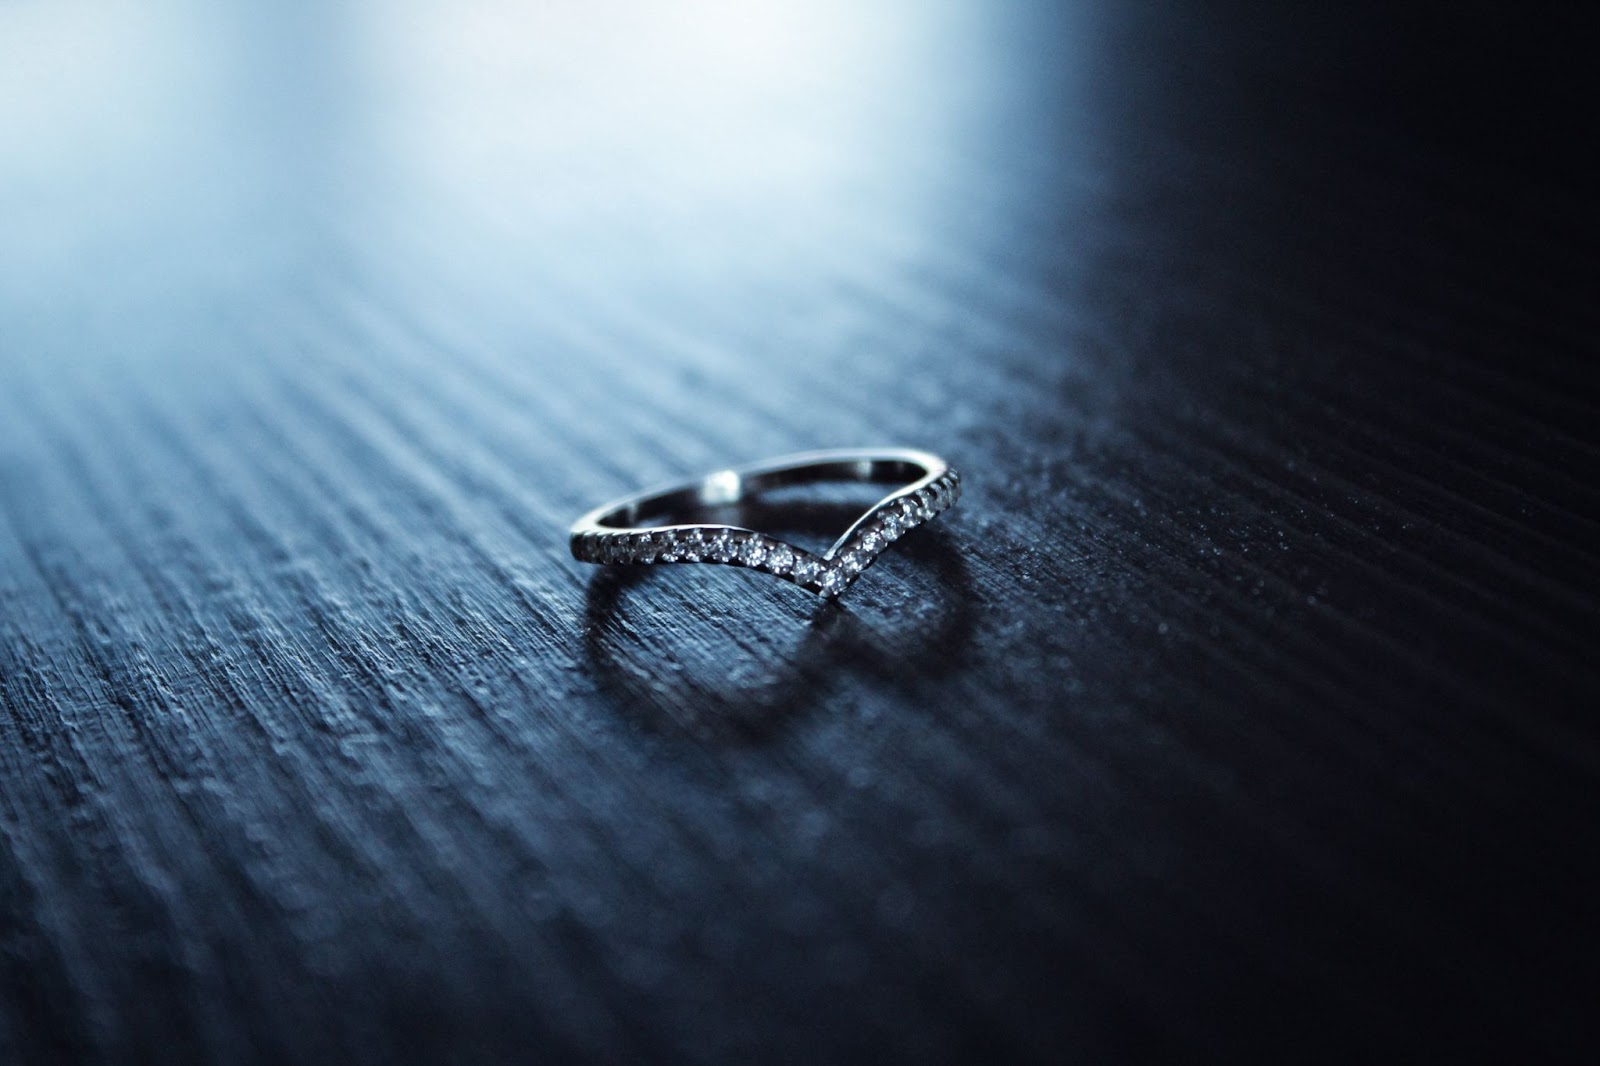 A curved, silver wedding band with diamond accents against a dark wood background